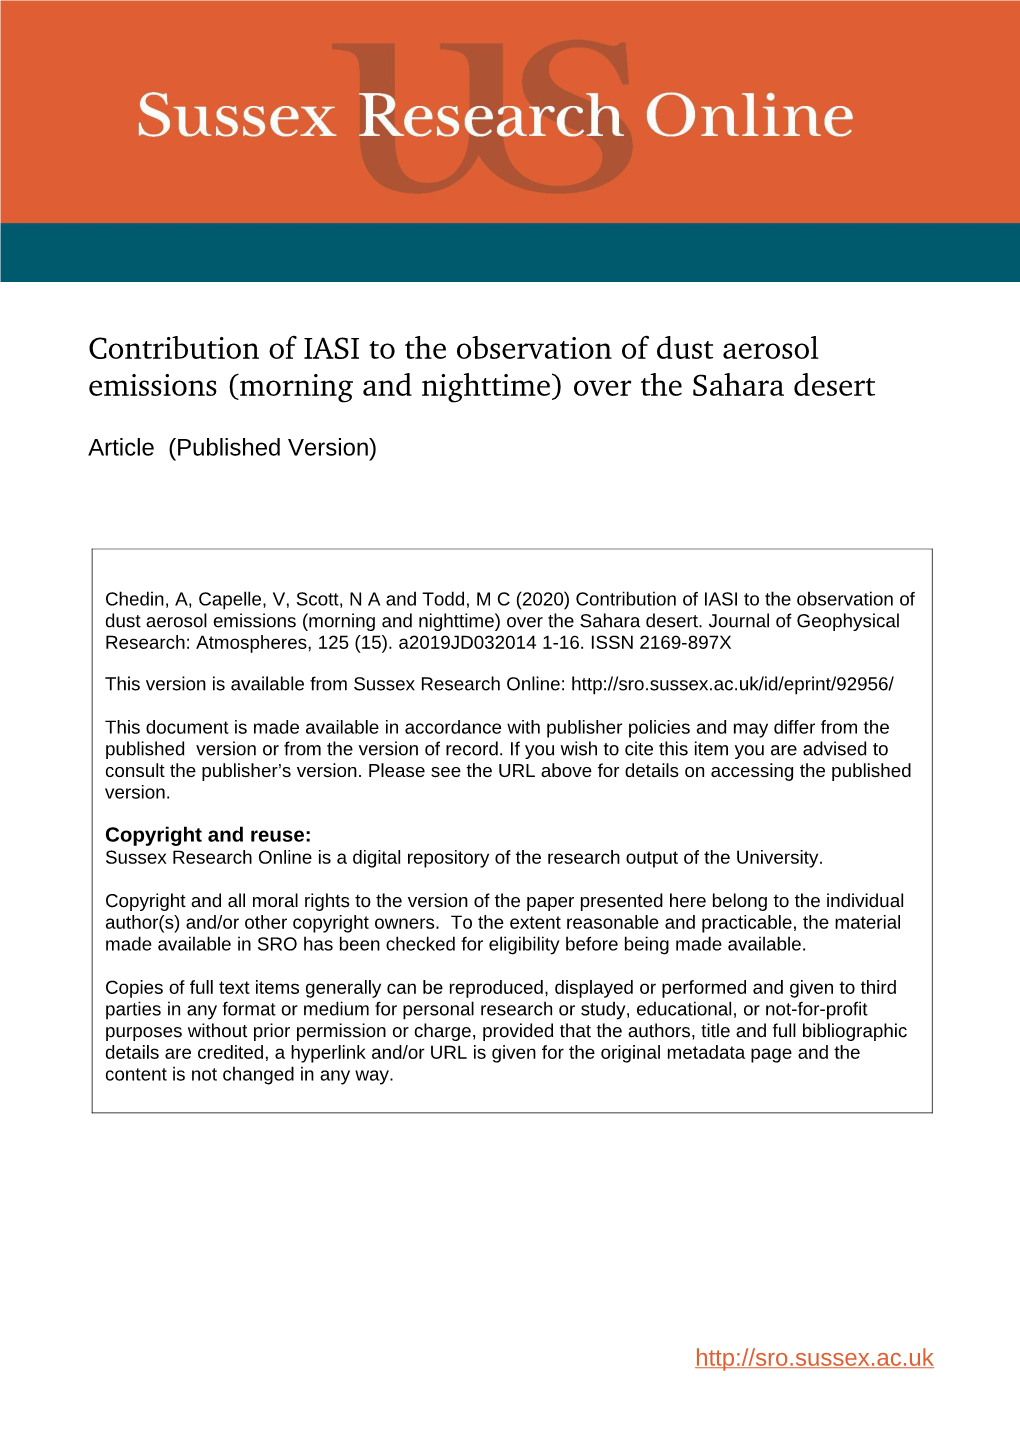 Contribution of IASI to the Observation of Dust Aerosol Emissions (Morning and Nighttime) Over the Sahara Desert